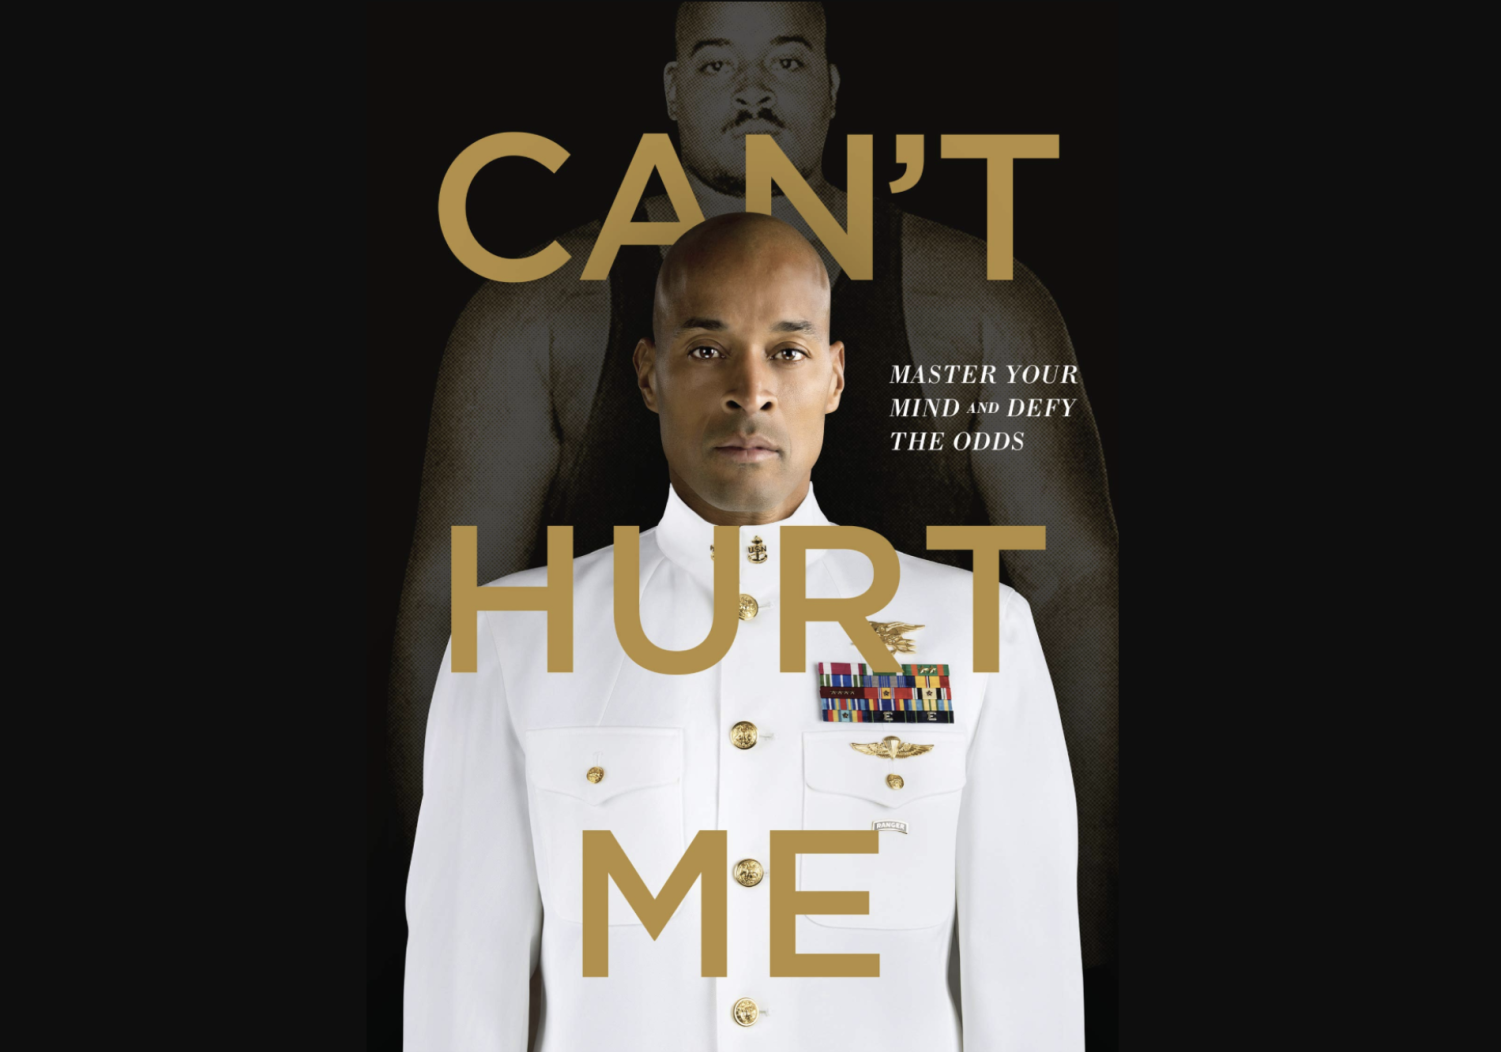 David Goggins - Given that I self-published Can't Hurt Me, it was